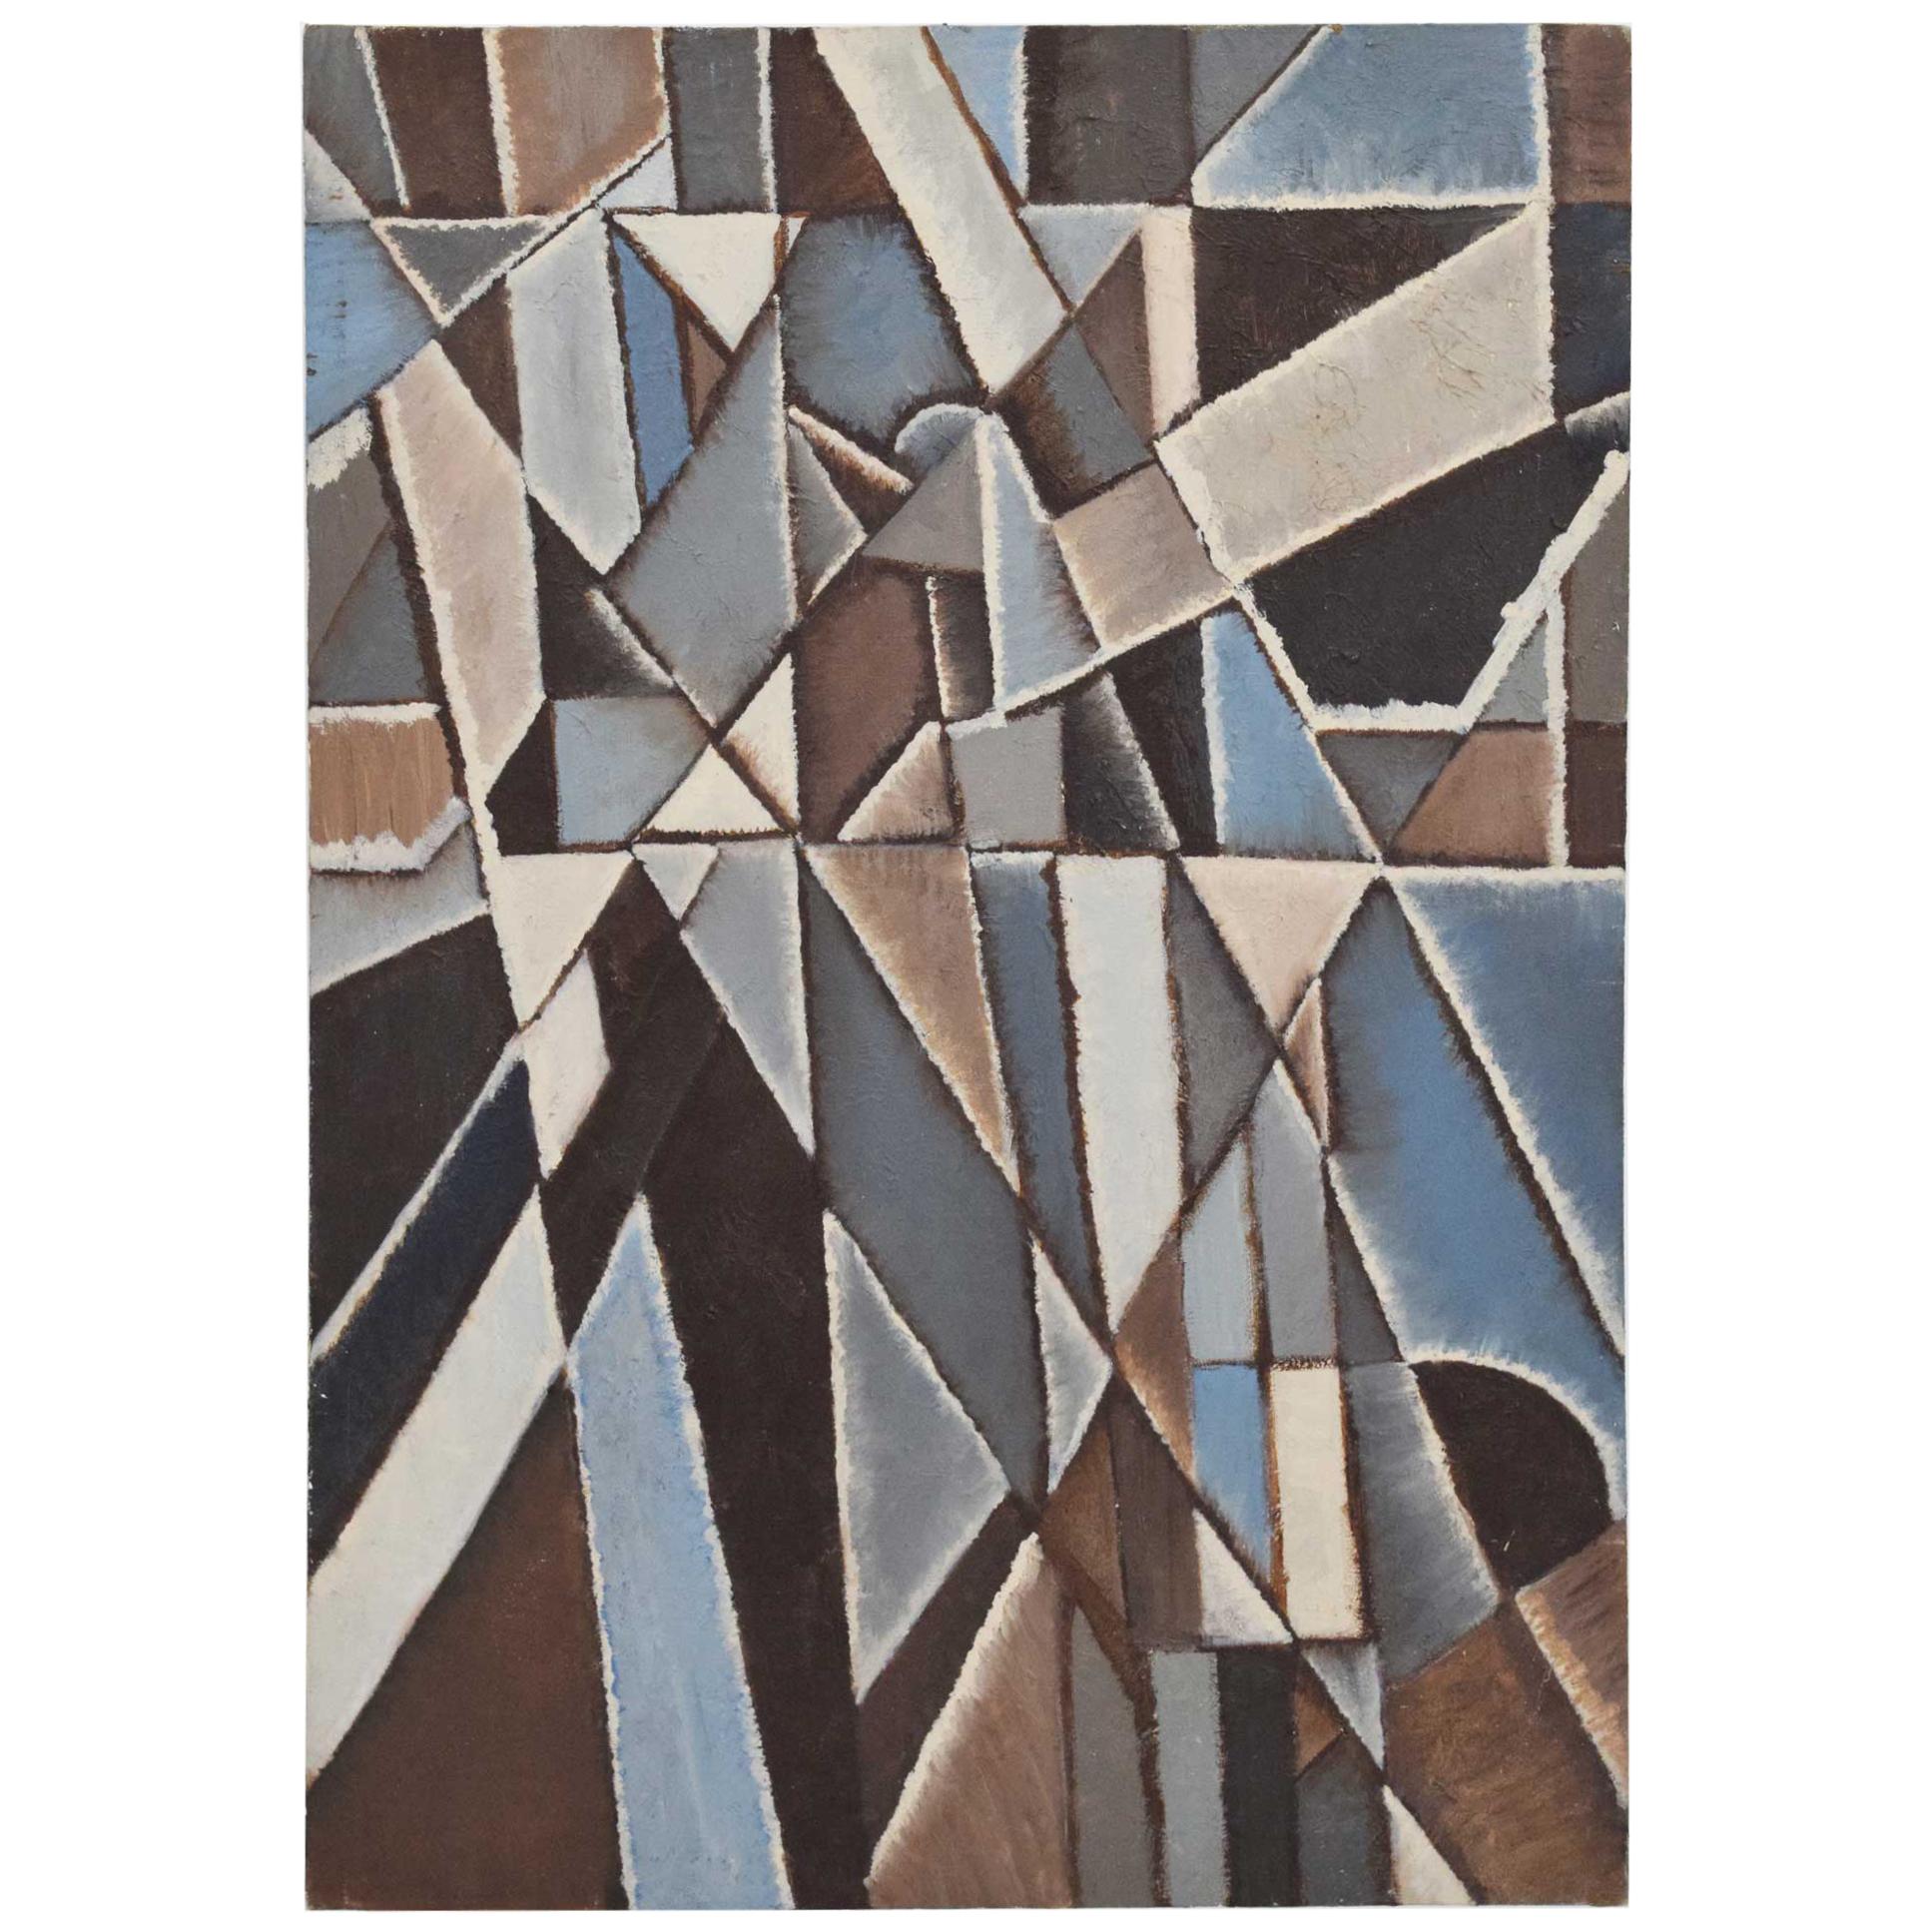 Midcentury New York School Abstract Modernist Cubist Oil Painting, 1960s For Sale